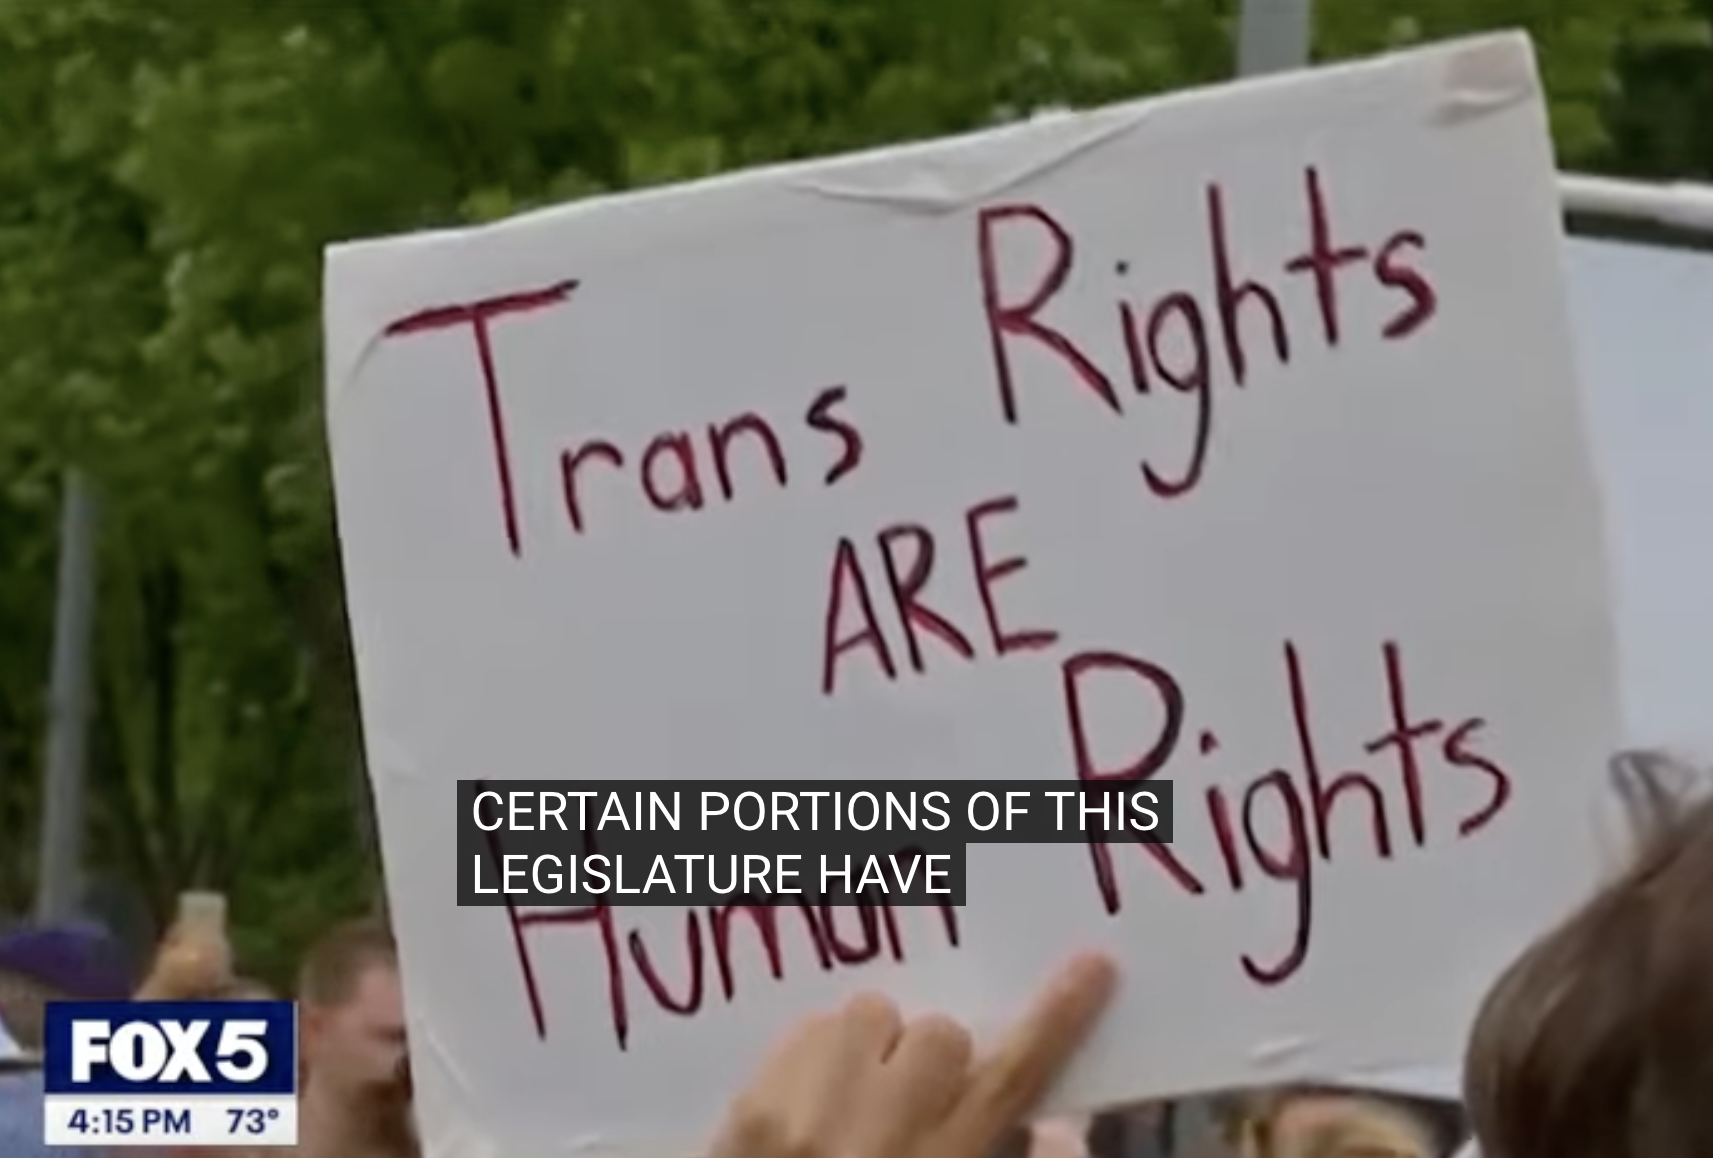 Georgia’s Transqueer Activists Are Not Telling the Truth - It’s Time to Call Them Out